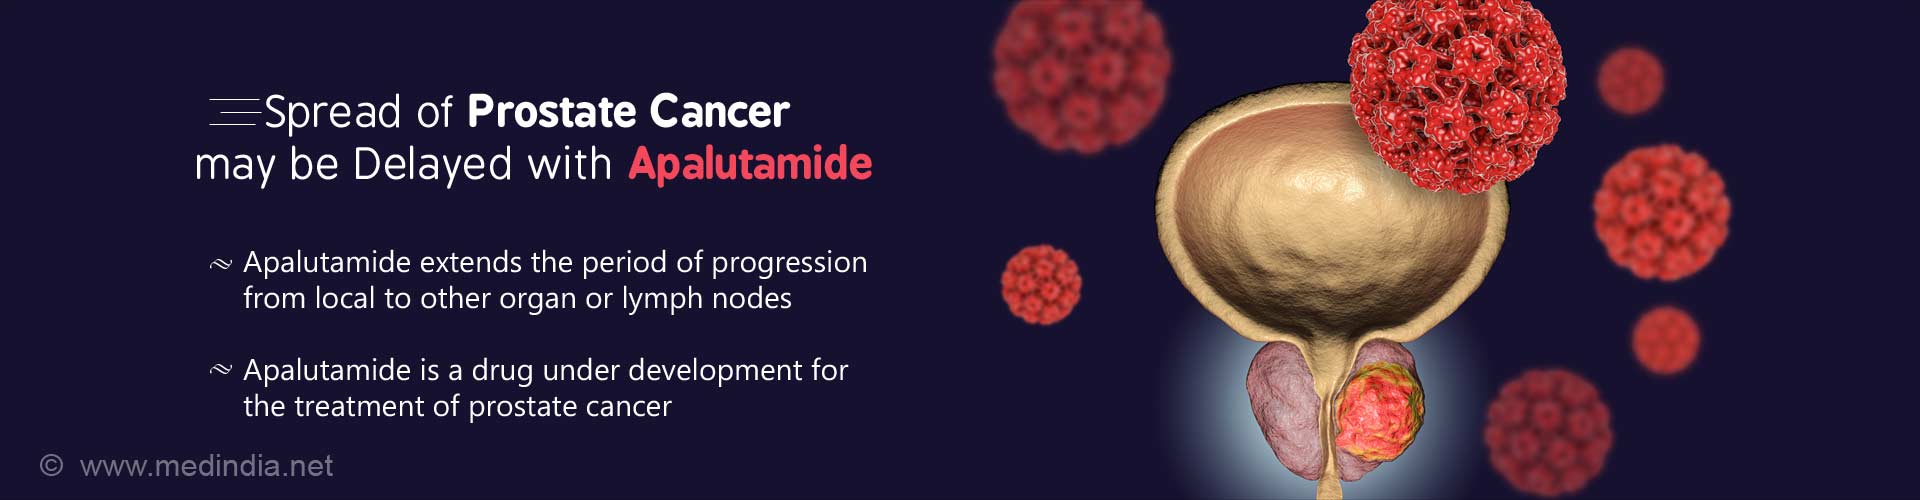 spread of prostate cancer may be delayed with apalutamide
- apalutamide extends the period of progression from local to other organ and lymph nodes
- apalutamide is a drug under development for the treatment of prostate cancer